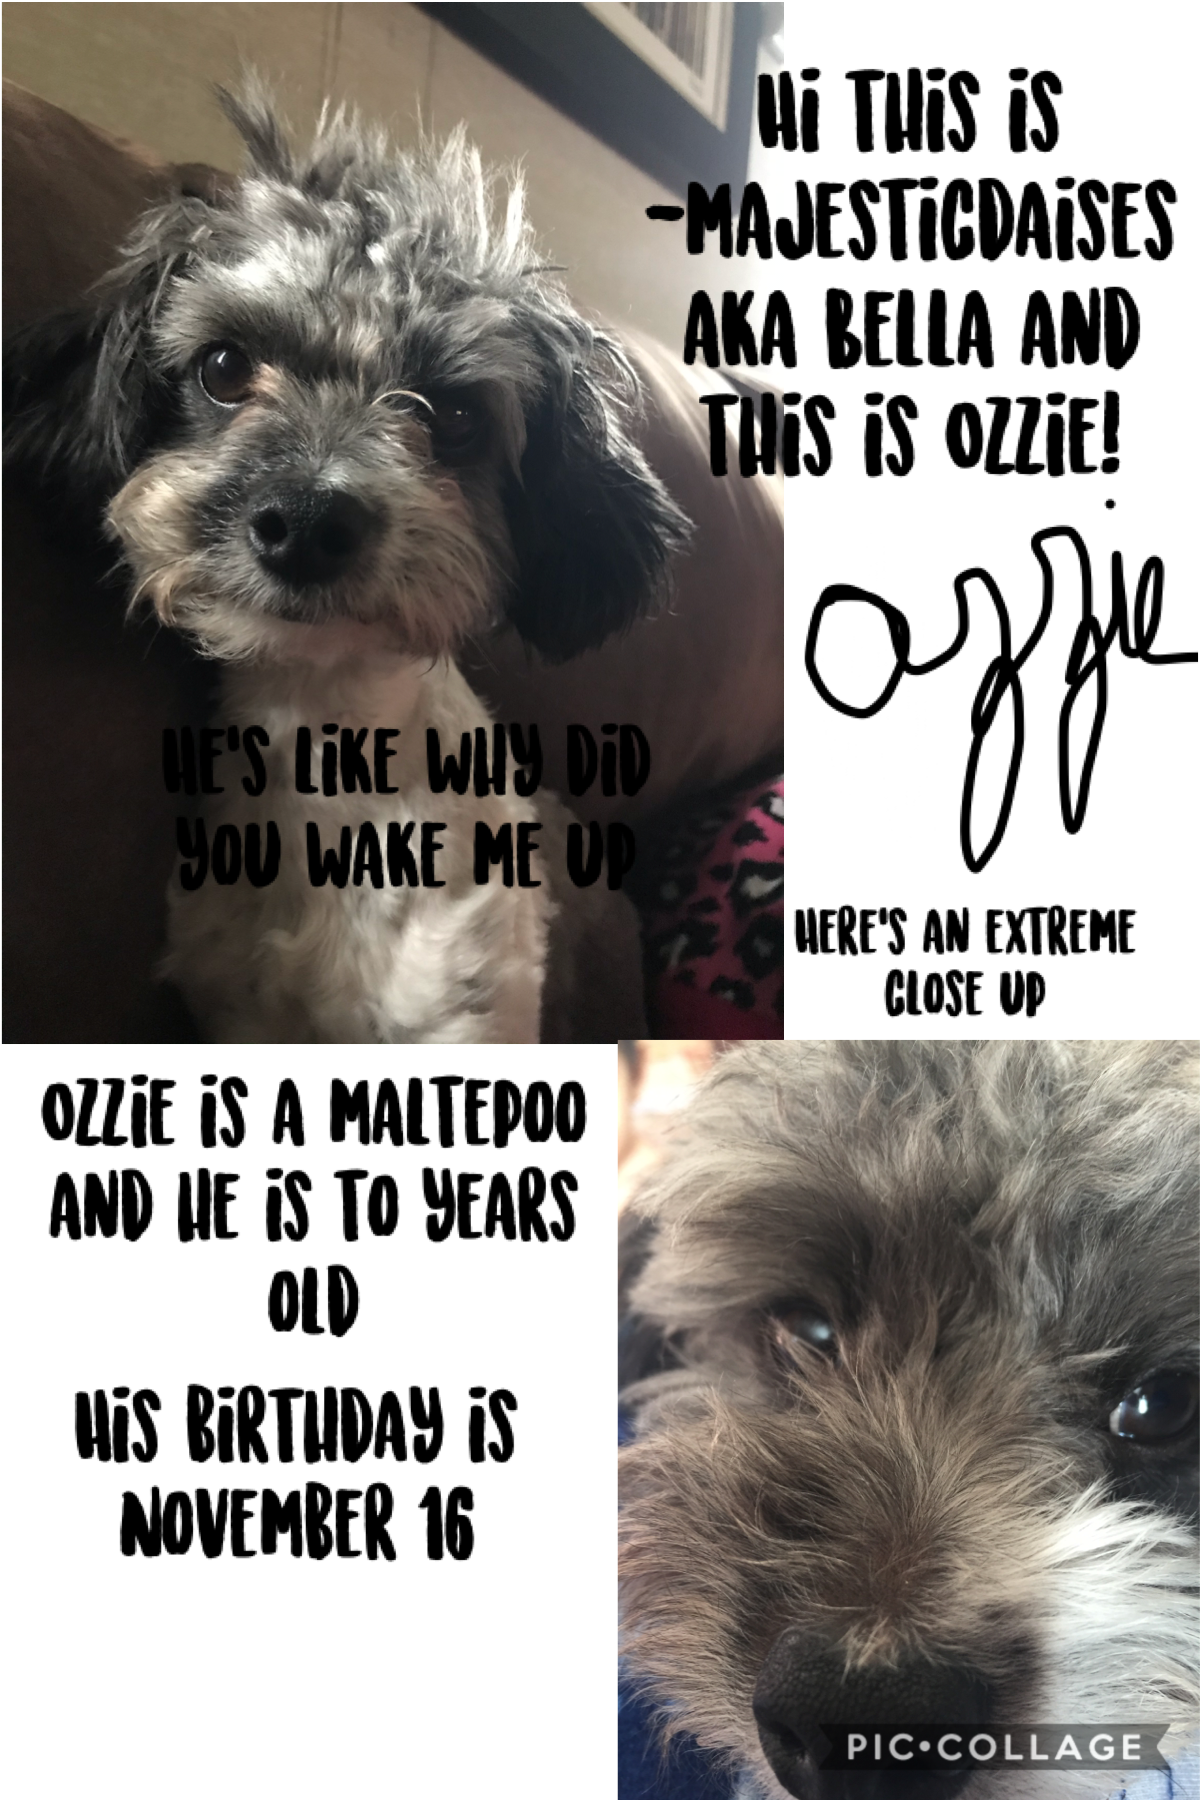 Hi this is Ozzie! Sorry about my cursive it sucks lol 😂 I also have a chicken so I’ll post about her too :)